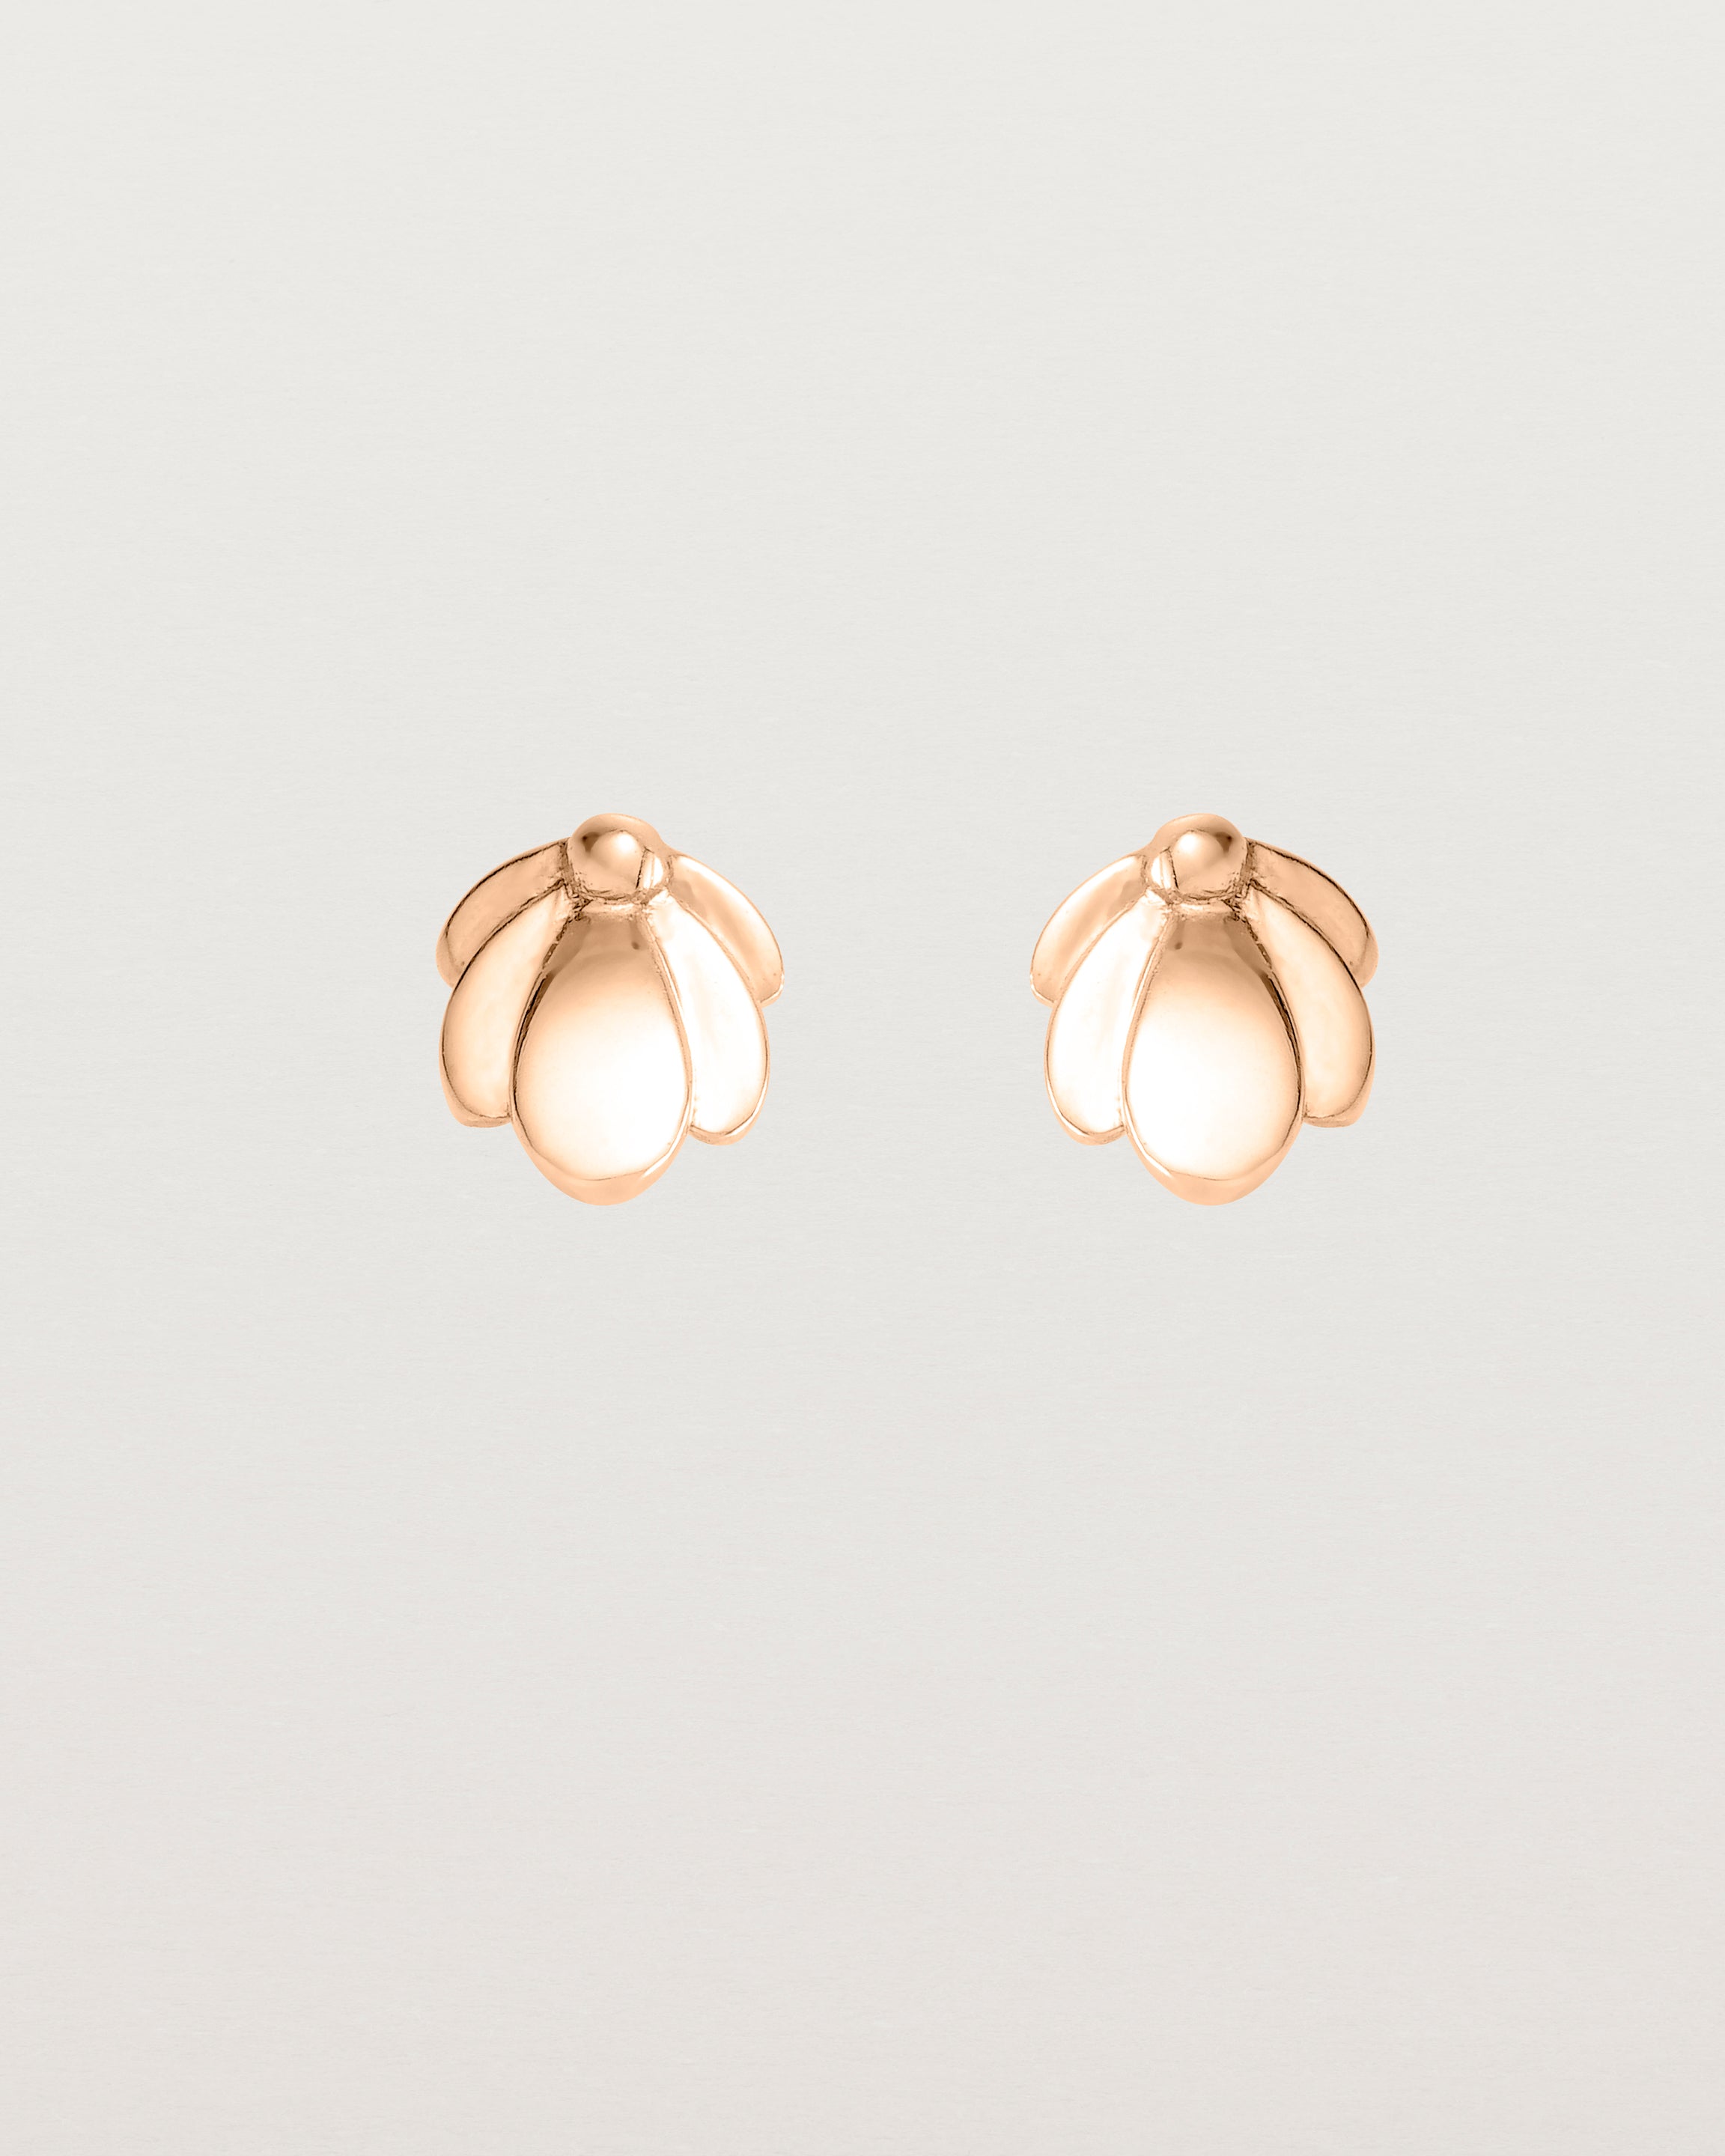 Front view of the Aeris Studs in Rose Gold.